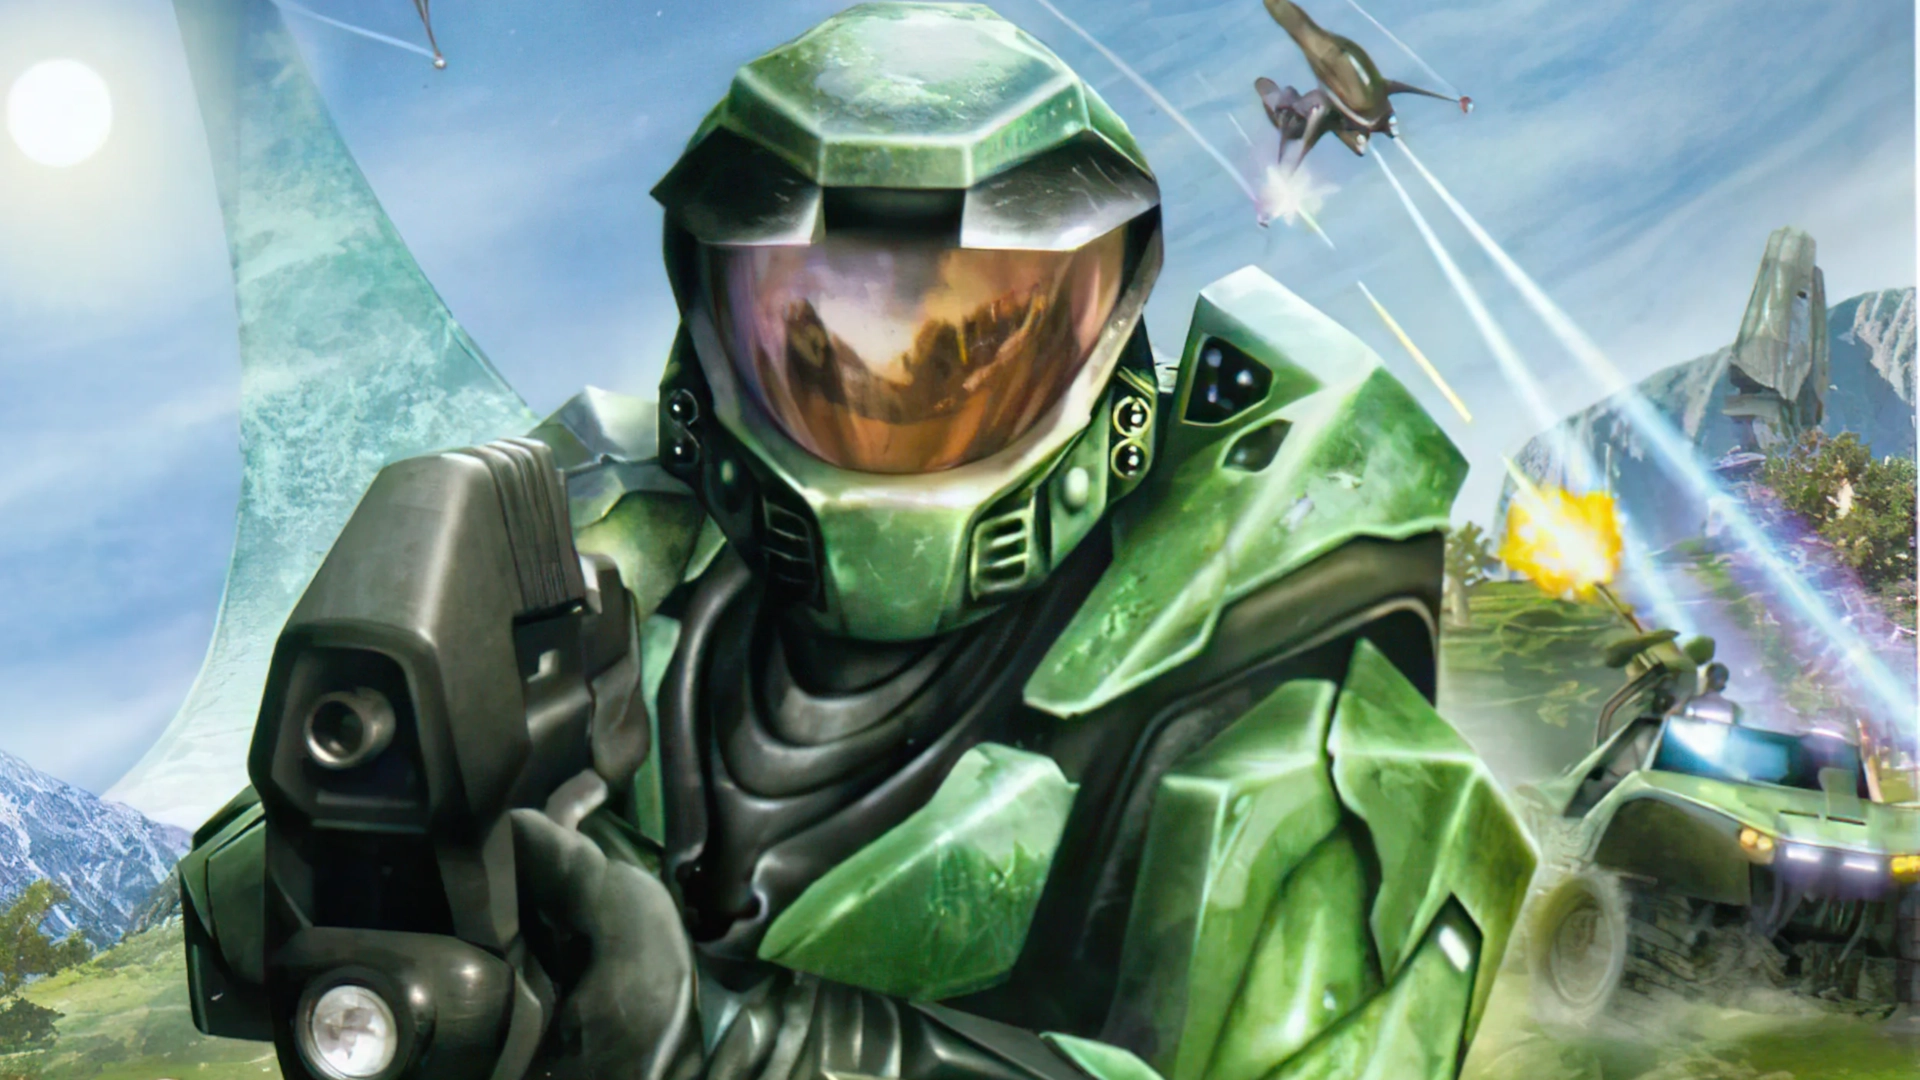 Developing Halo: Combat Evolved Involved Numerous Sacrifices